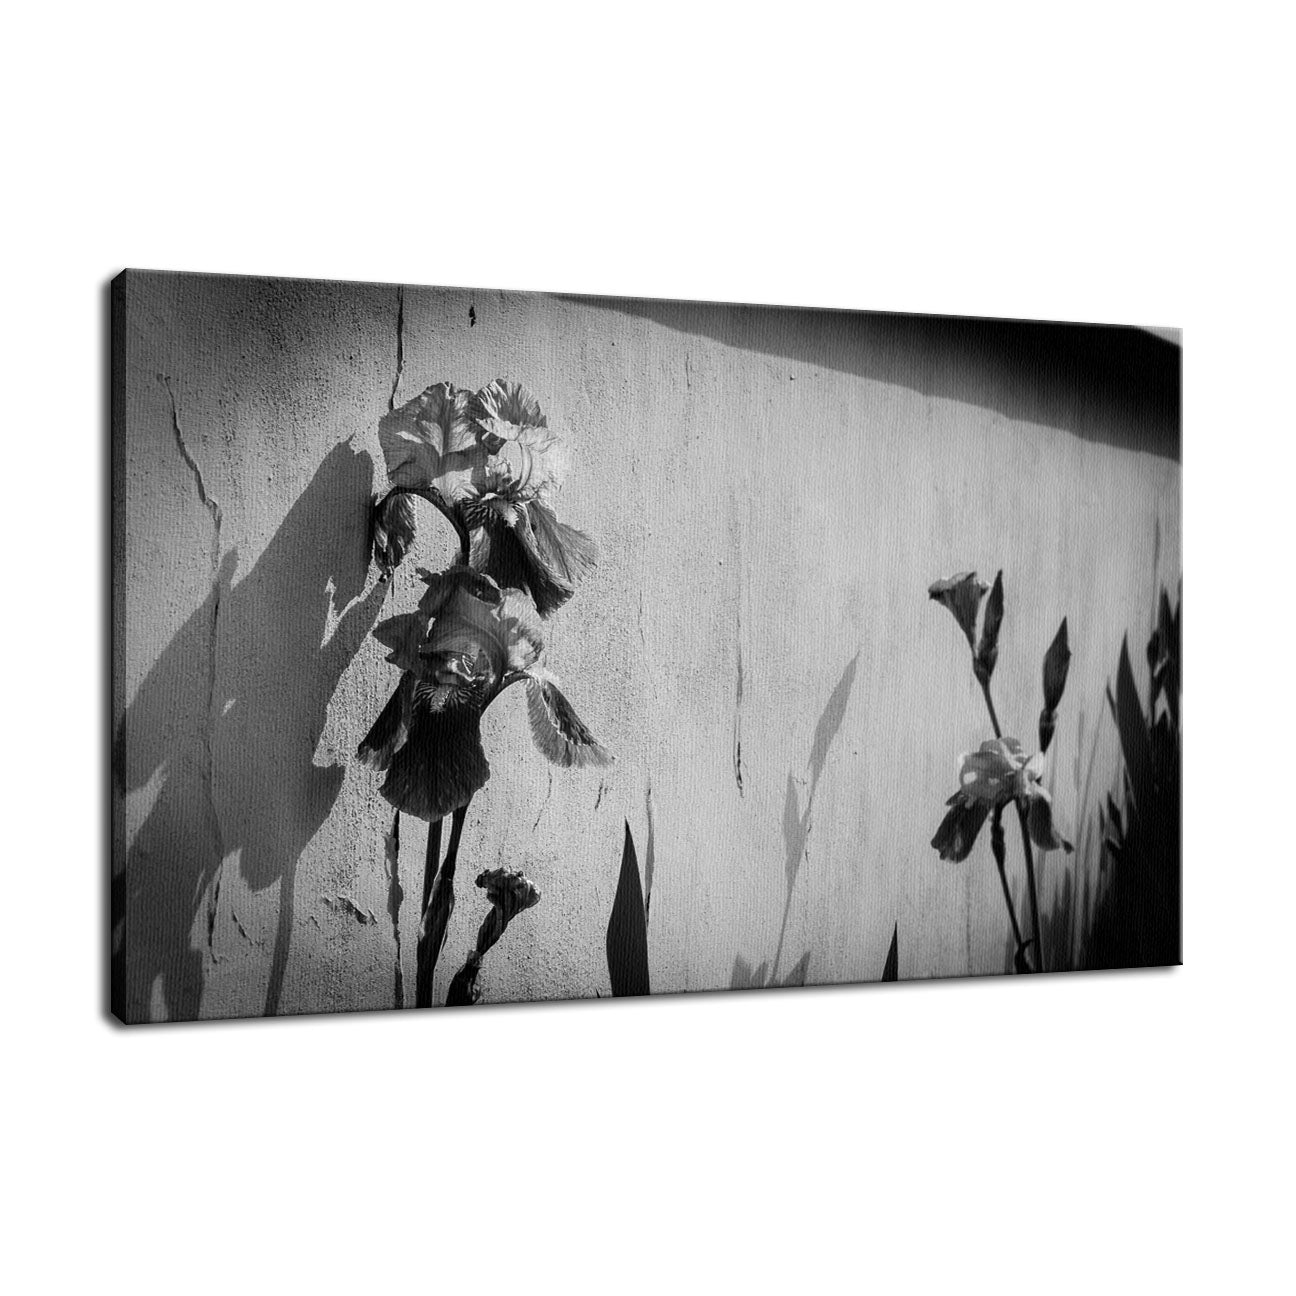 Iris on Wall in Black and White Nature / Floral Photo Fine Art Canvas Wall Art Prints  - PIPAFINEART